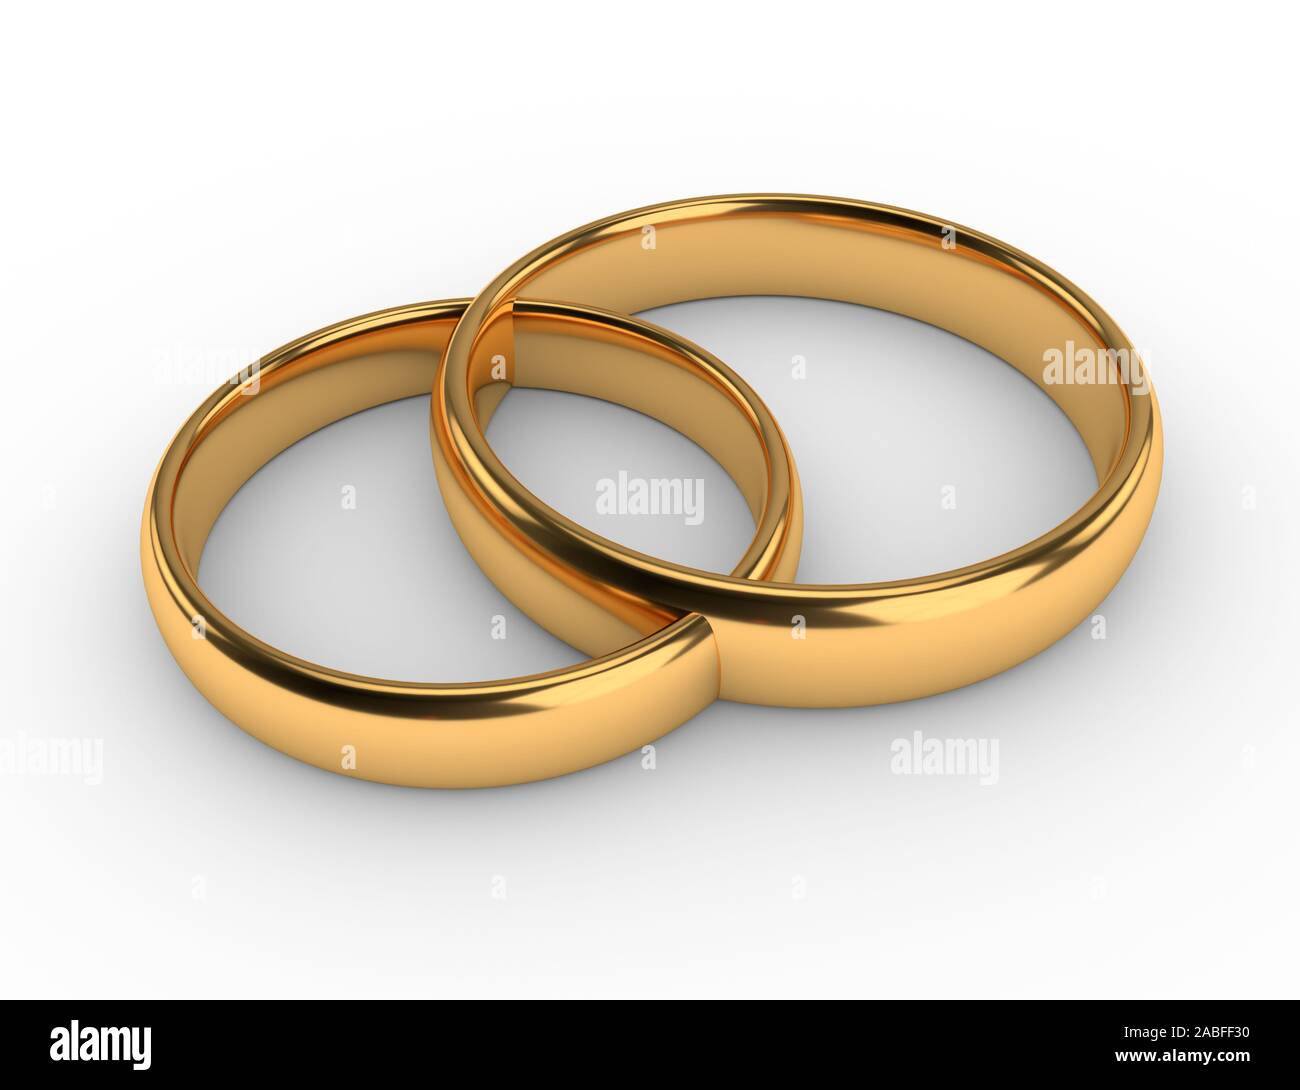 Illustration of two connected gold wedding rings. 3d render Stock Photo